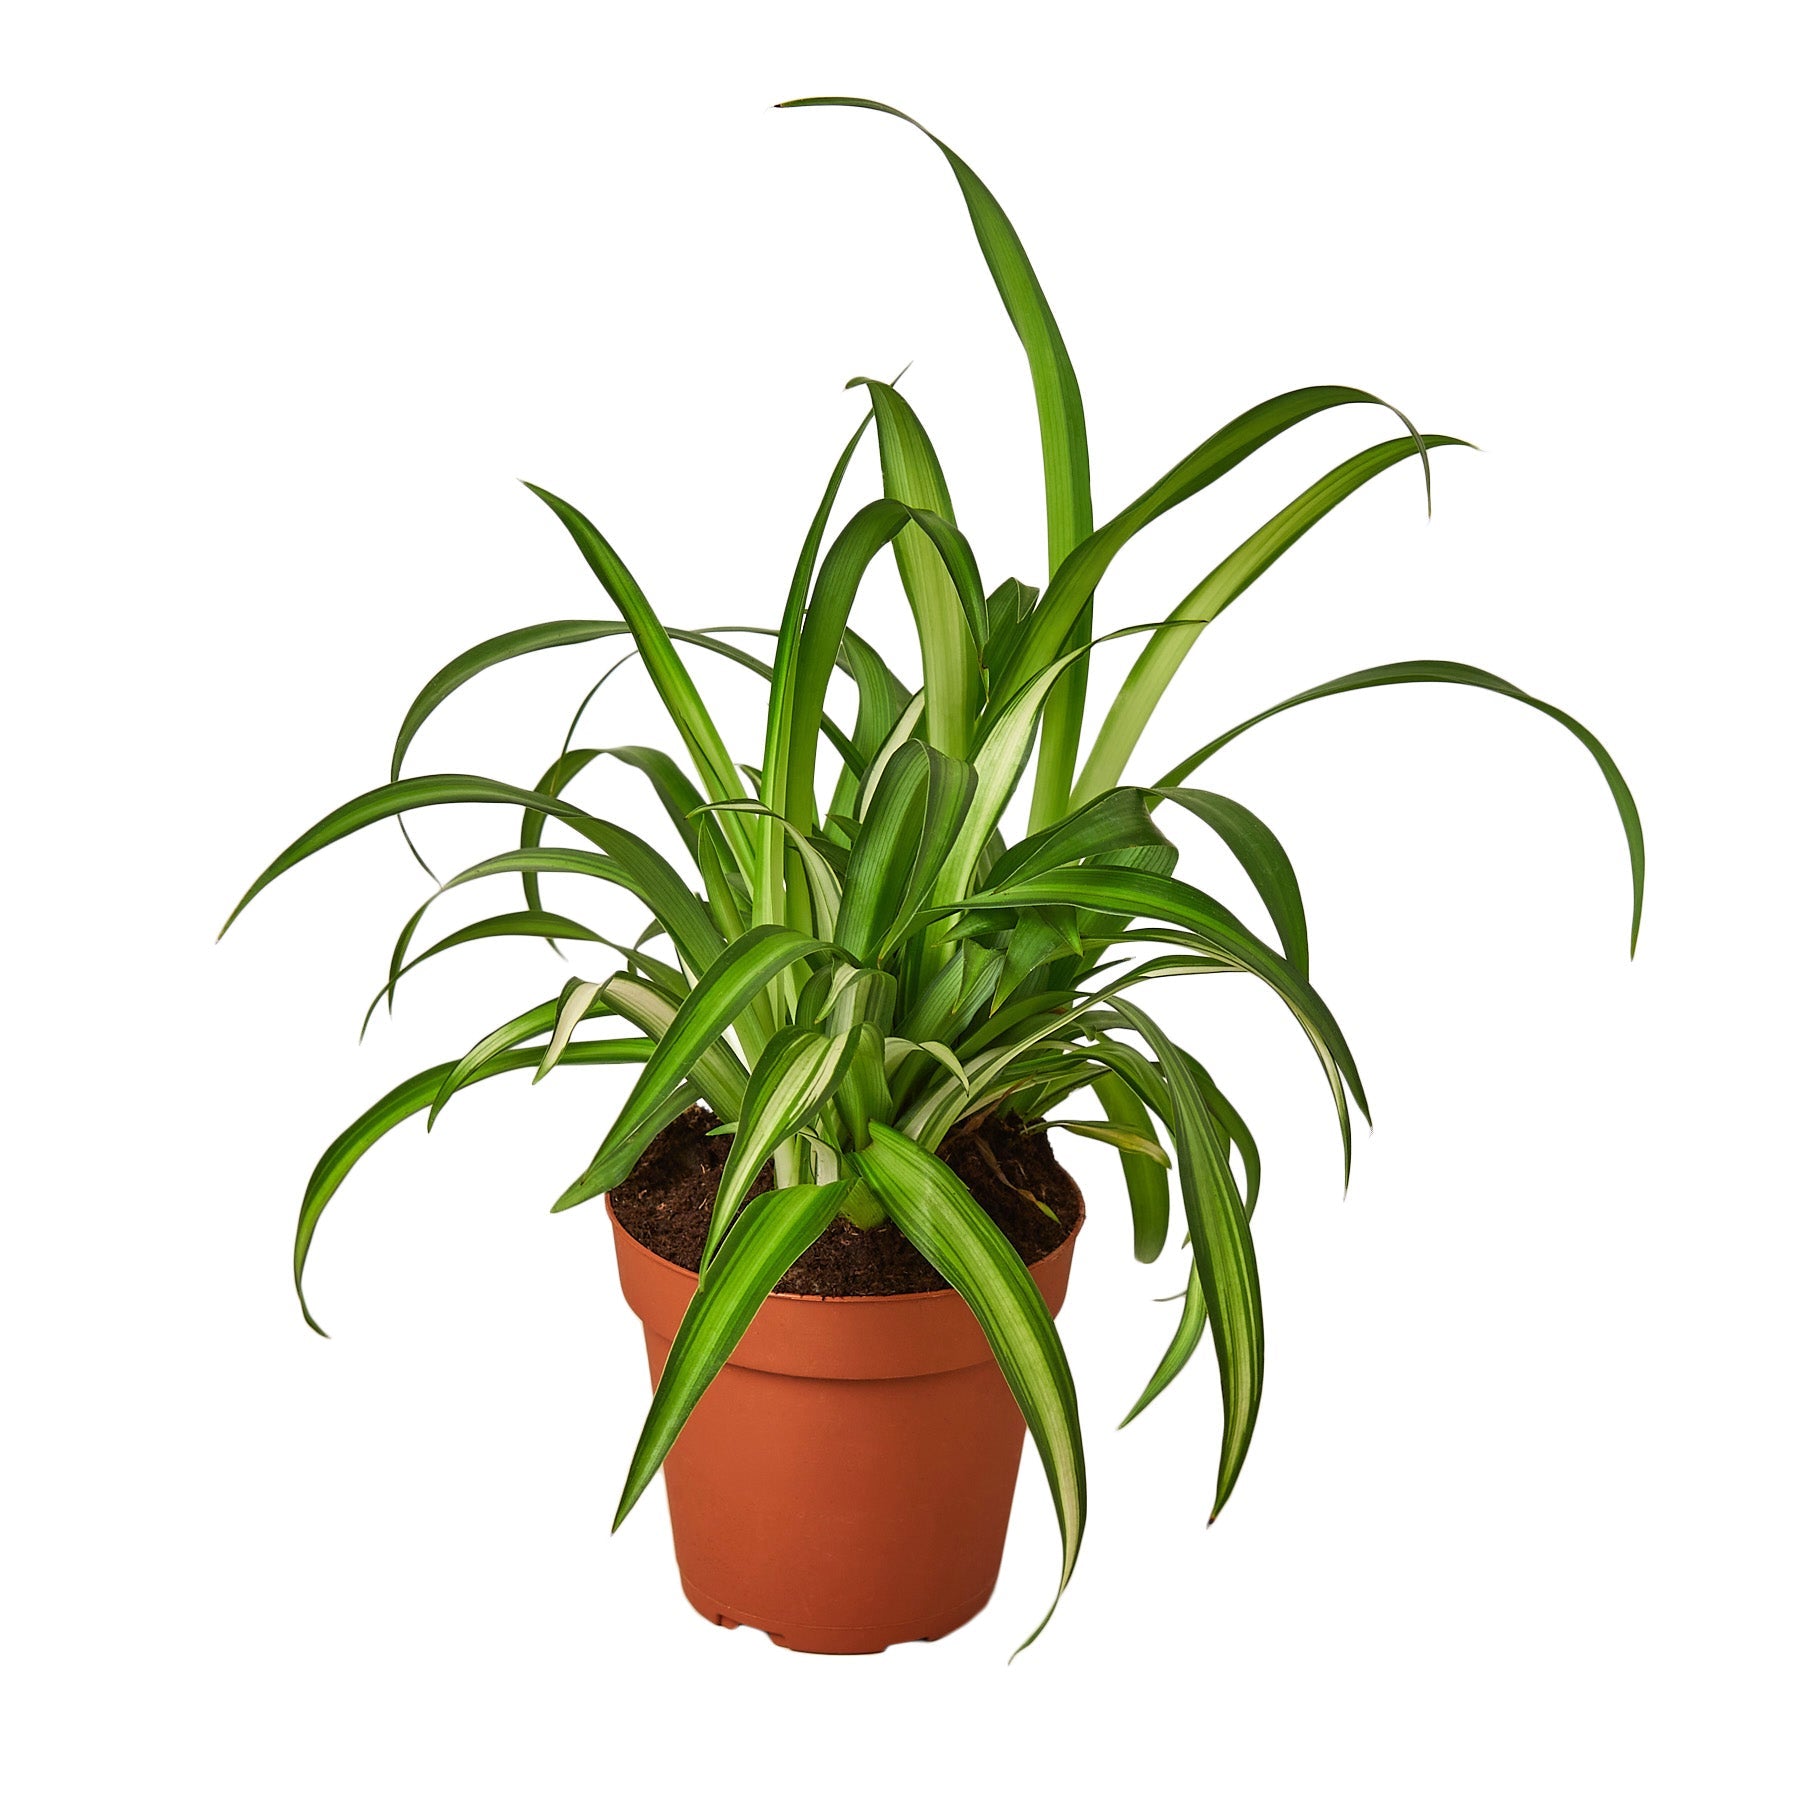 A plant in a pot.